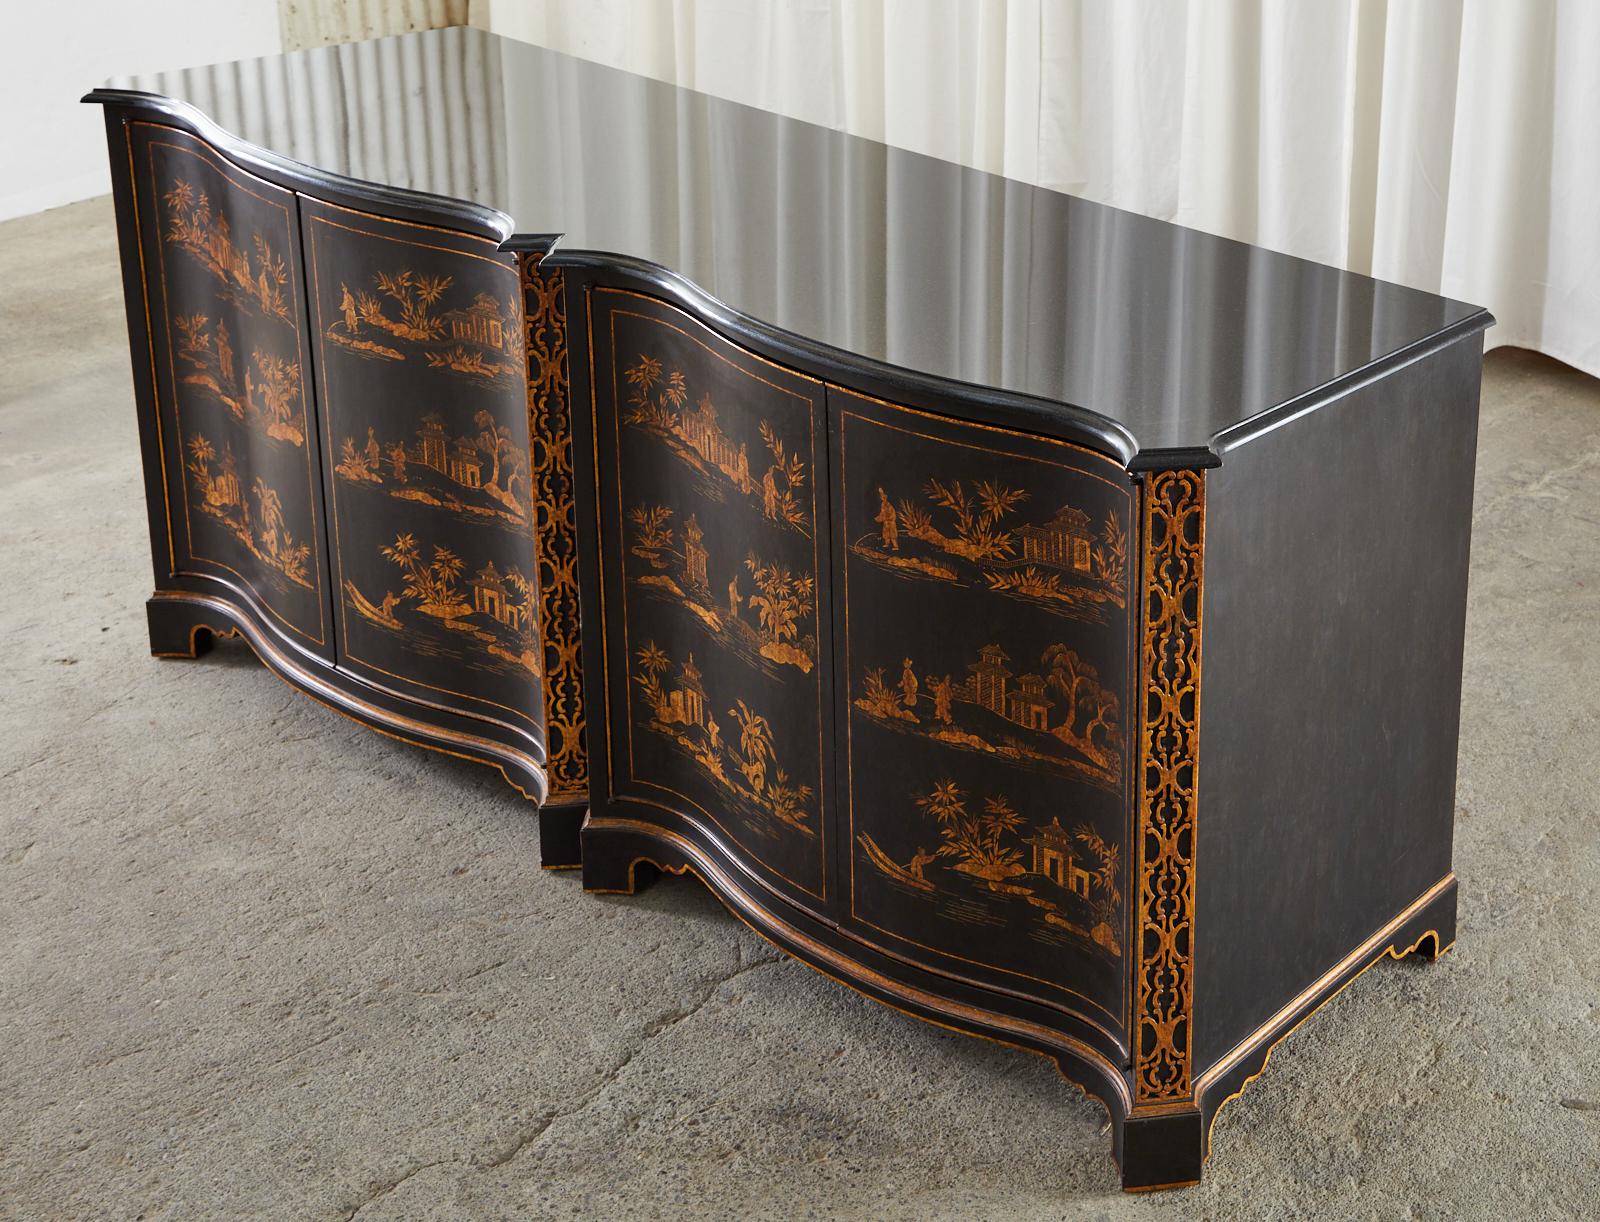 Spectacular large sideboard chest, buffet, or credenza featuring hand painted parcel gilt chinoiserie reserves by Nancy Corzine. The bespoke cabinet has a serpentine front with four large doors separated by columns of Chinese Chippendale style